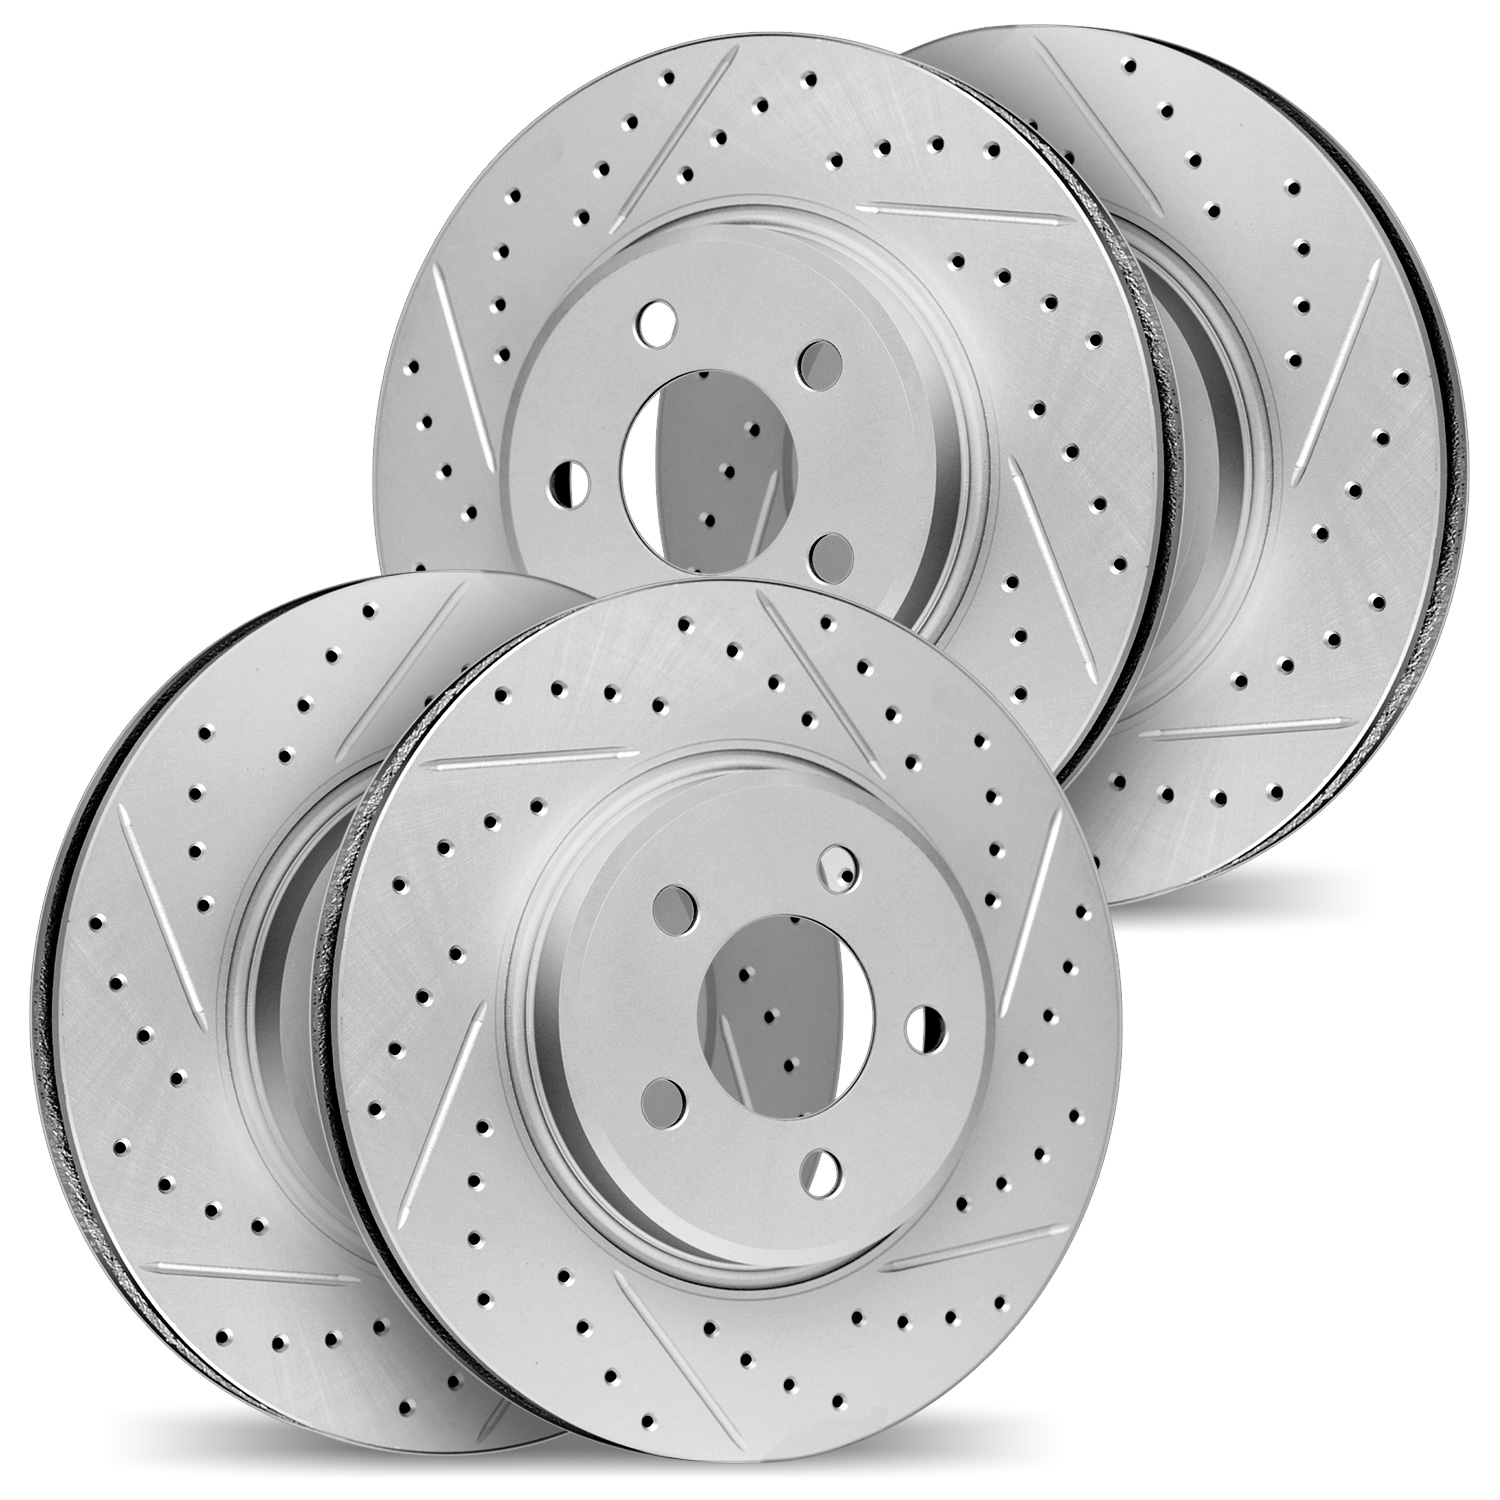 2004-46007 Geoperformance Drilled/Slotted Brake Rotors, Fits Select GM, Position: Front and Rear